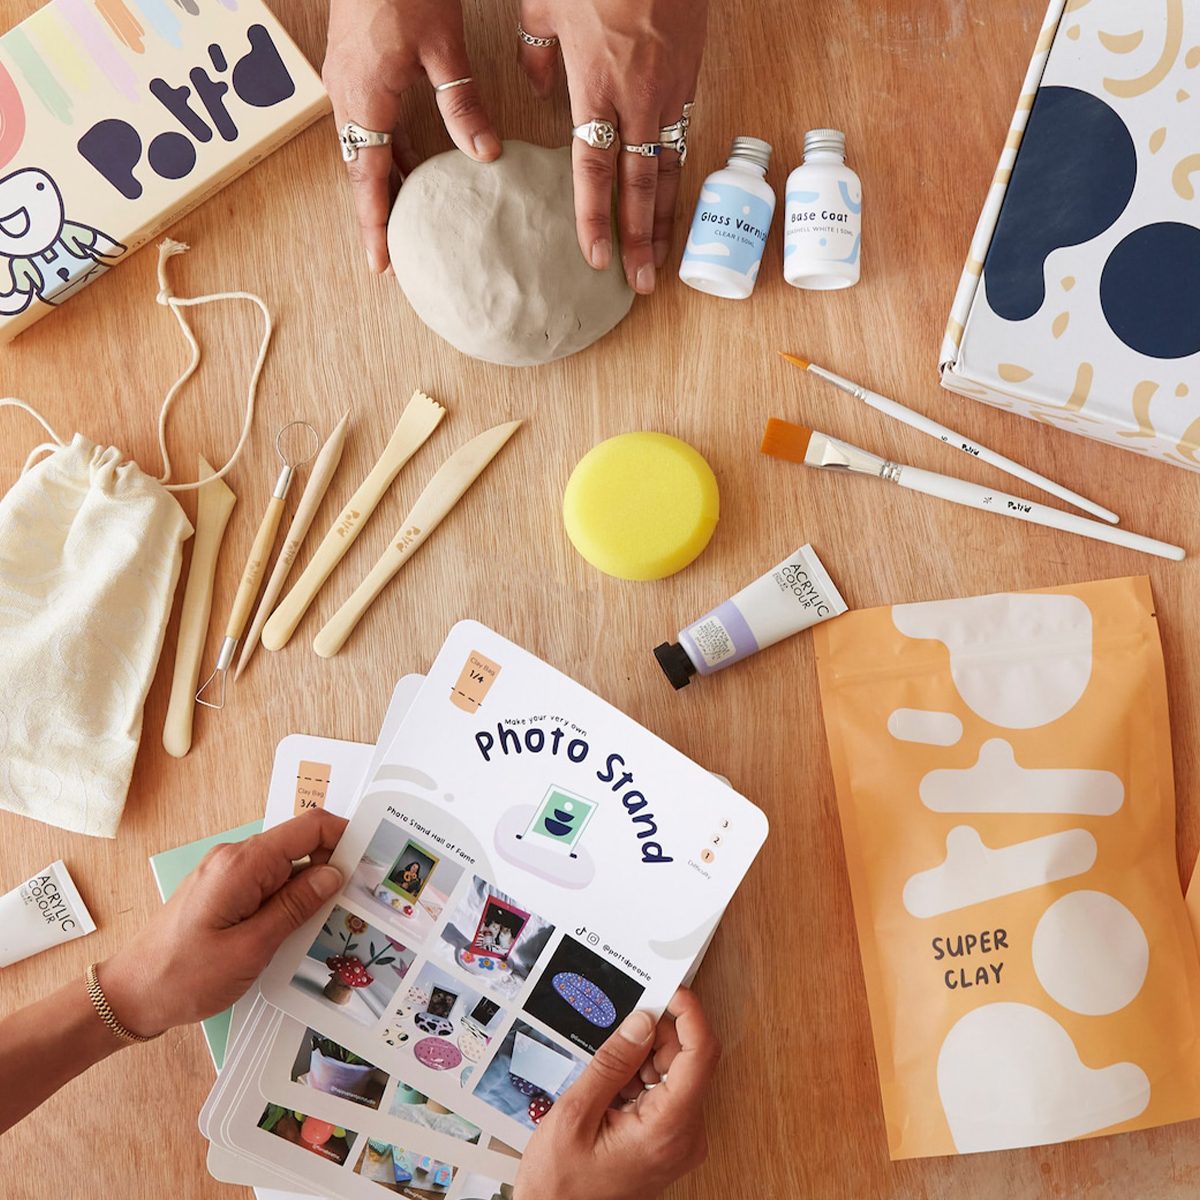 Which craft kits for adults are the best gifts? - Learn to create